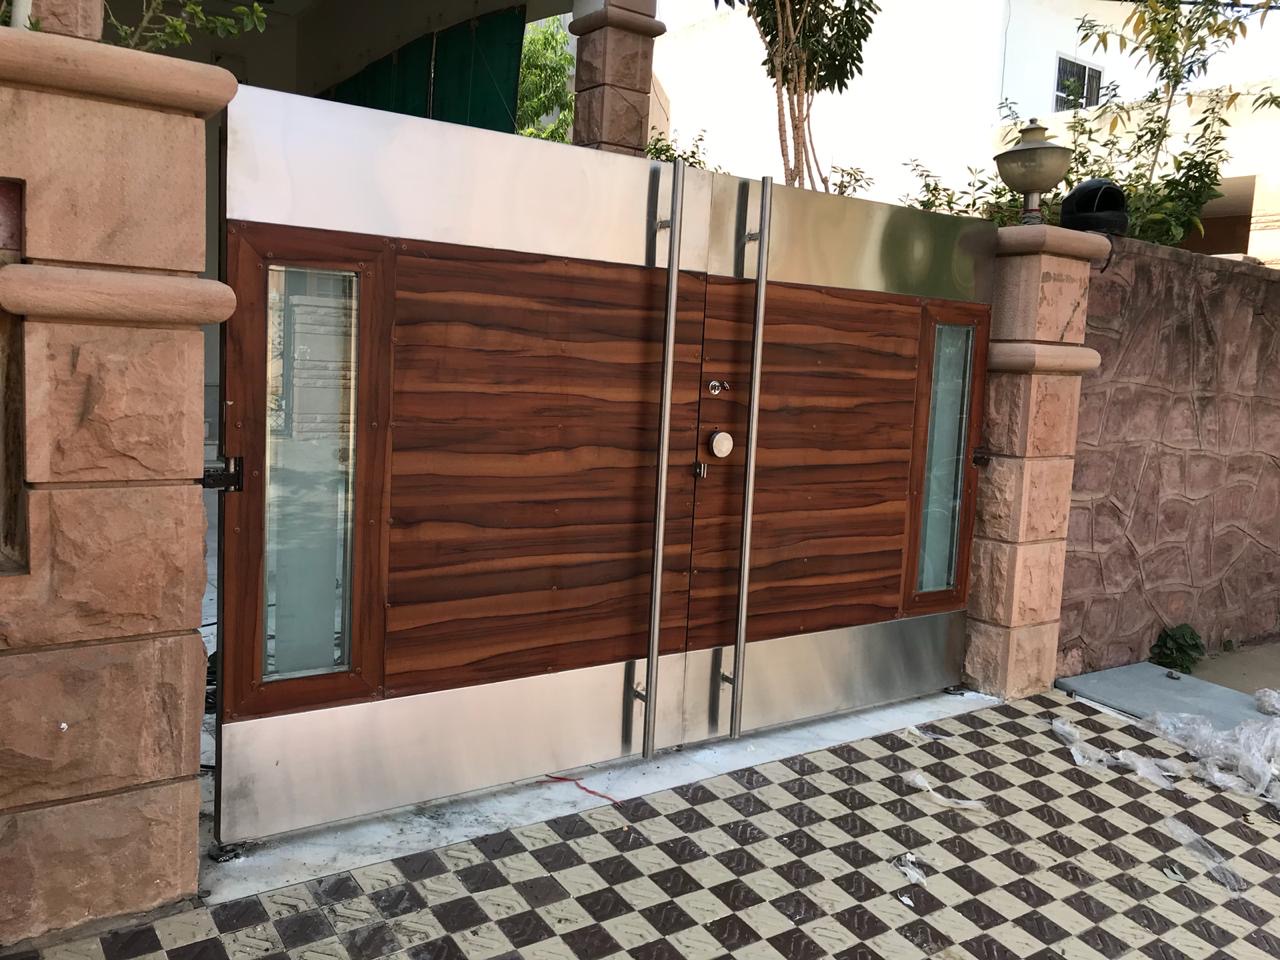 STAINLESS STEEL GATE WITH GLASS – Commercial hotel kitchen equipment